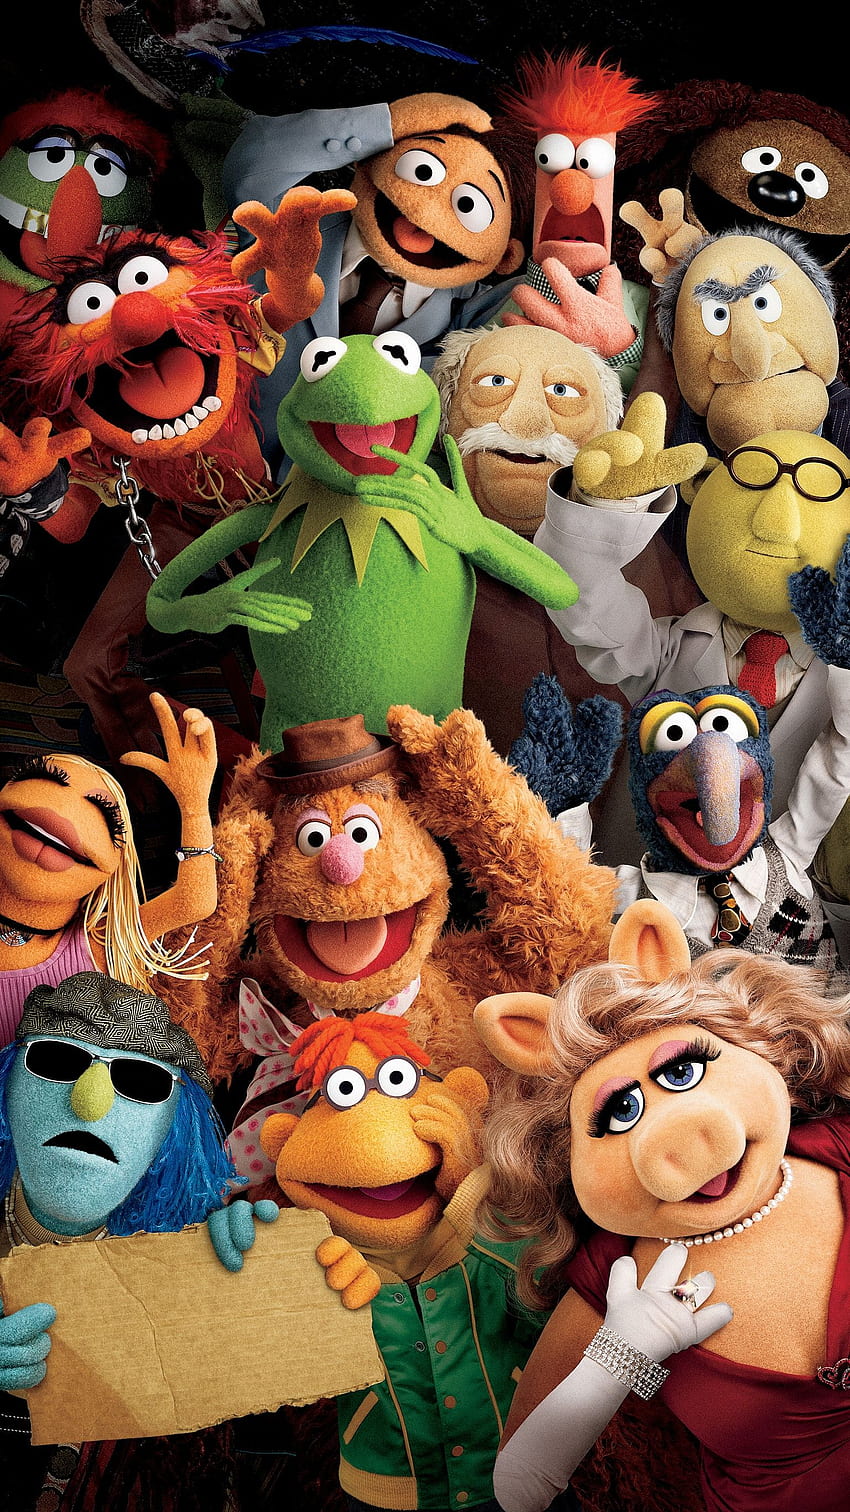 Crazy Amount Of Muppets Wallpaper by Drums107 on DeviantArt